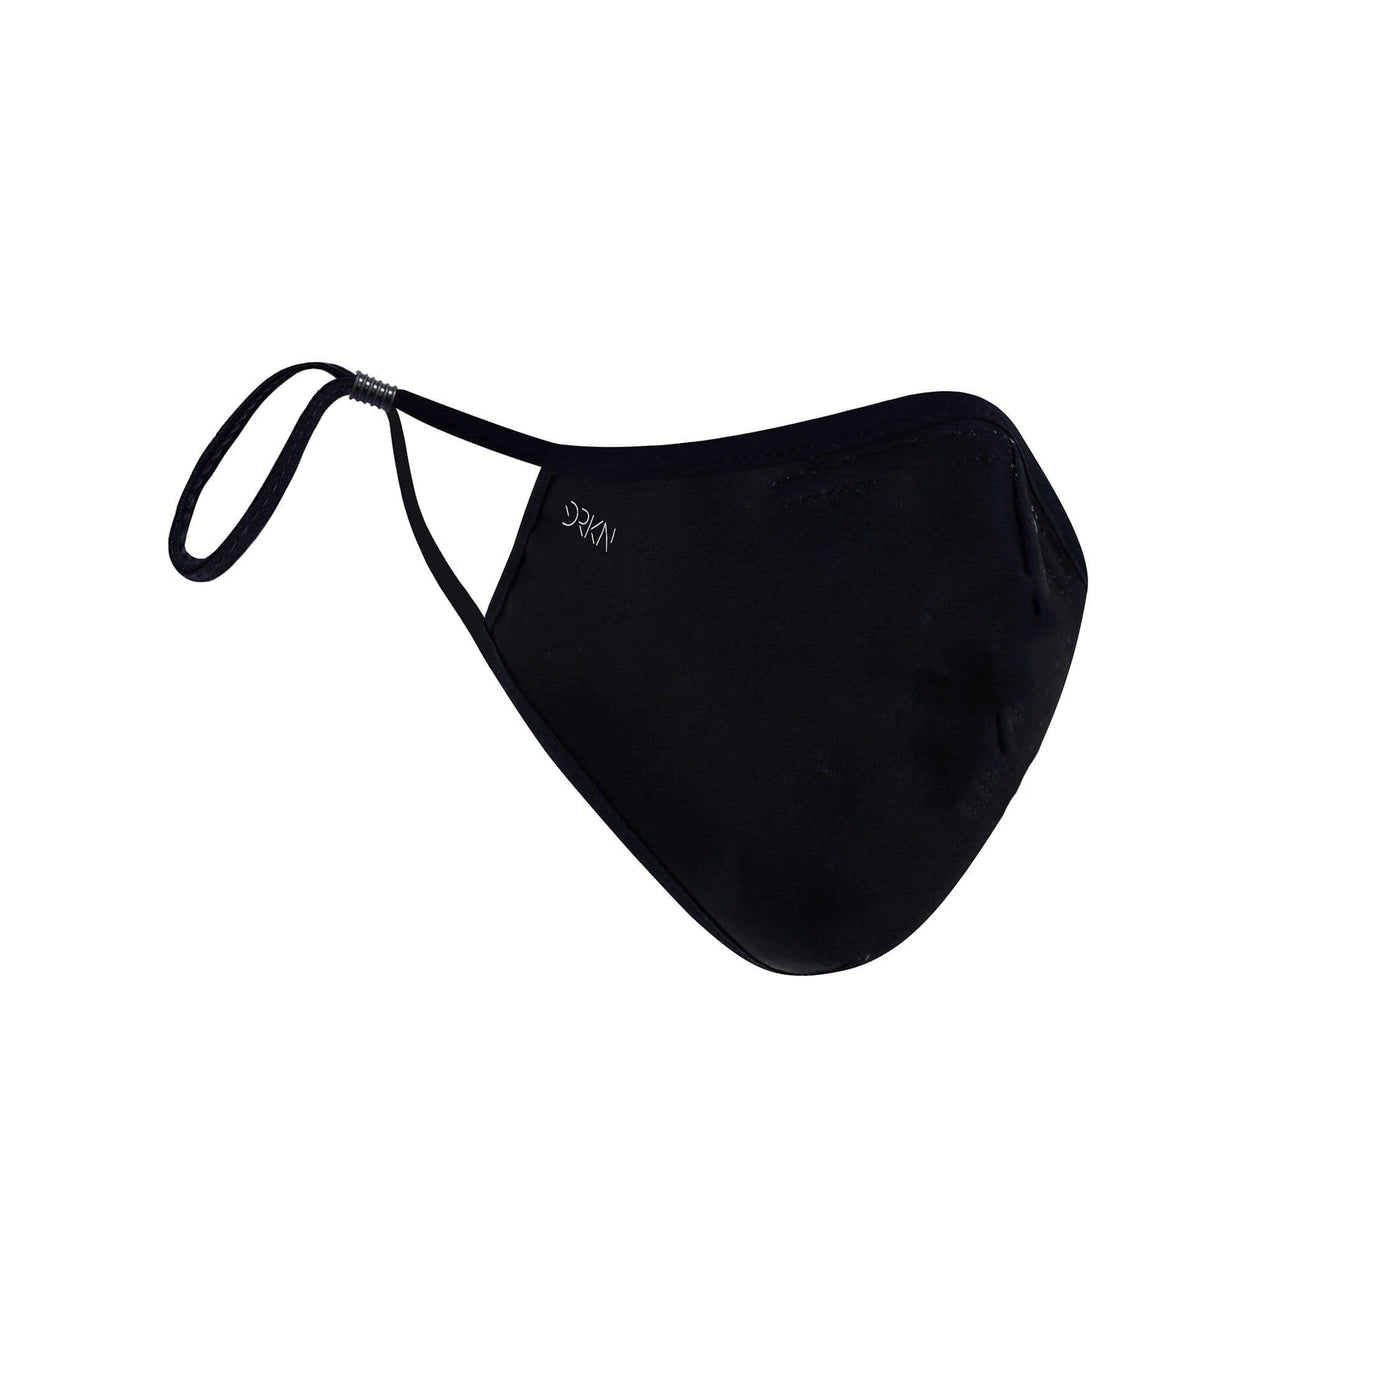 A black discreet face mask. Very discreet DRKN logo on the side.